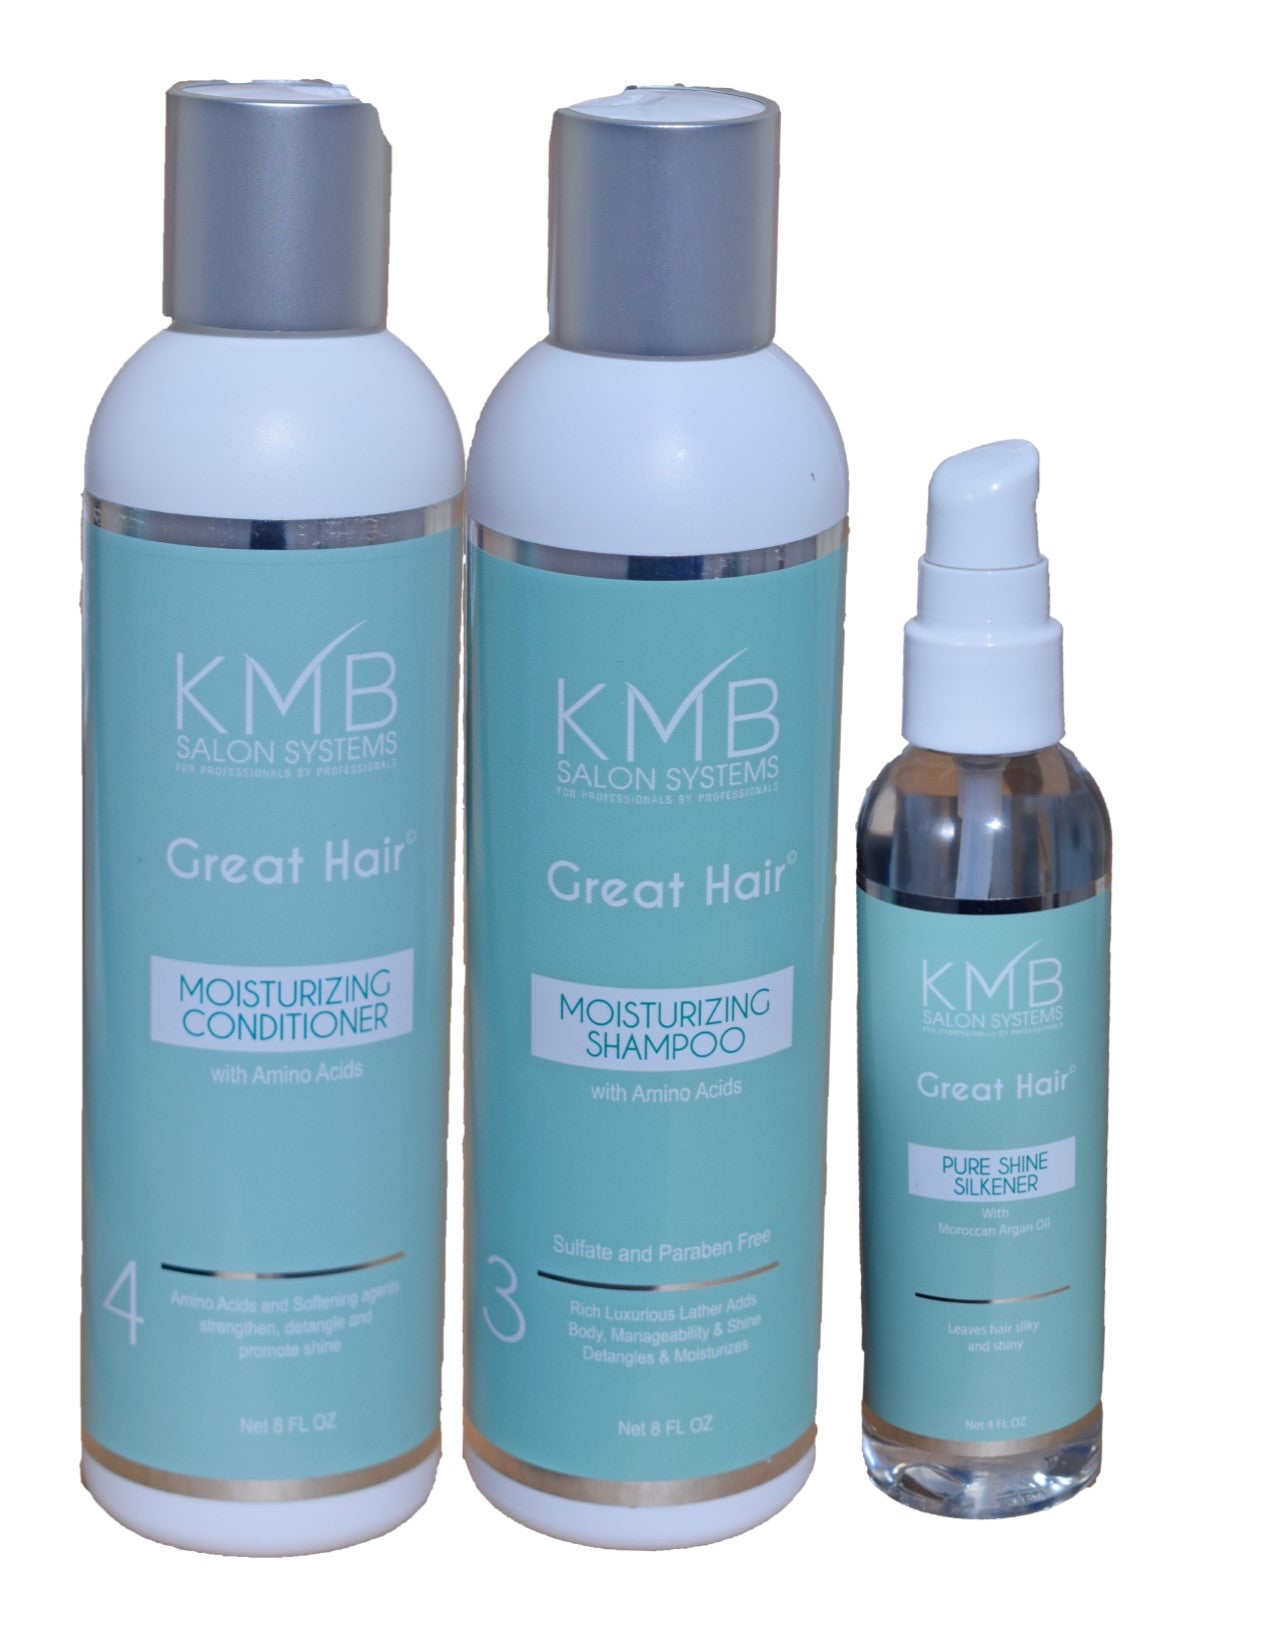 KMB Great Hair retail trio is the perfect at home maintenance collection.  The trio provides the purchaser an 8 ounce Moisturizing Shampoo, an 8 ounce Moisturizing Conditioner and a 2 ounce Pure Shine Silkener. 